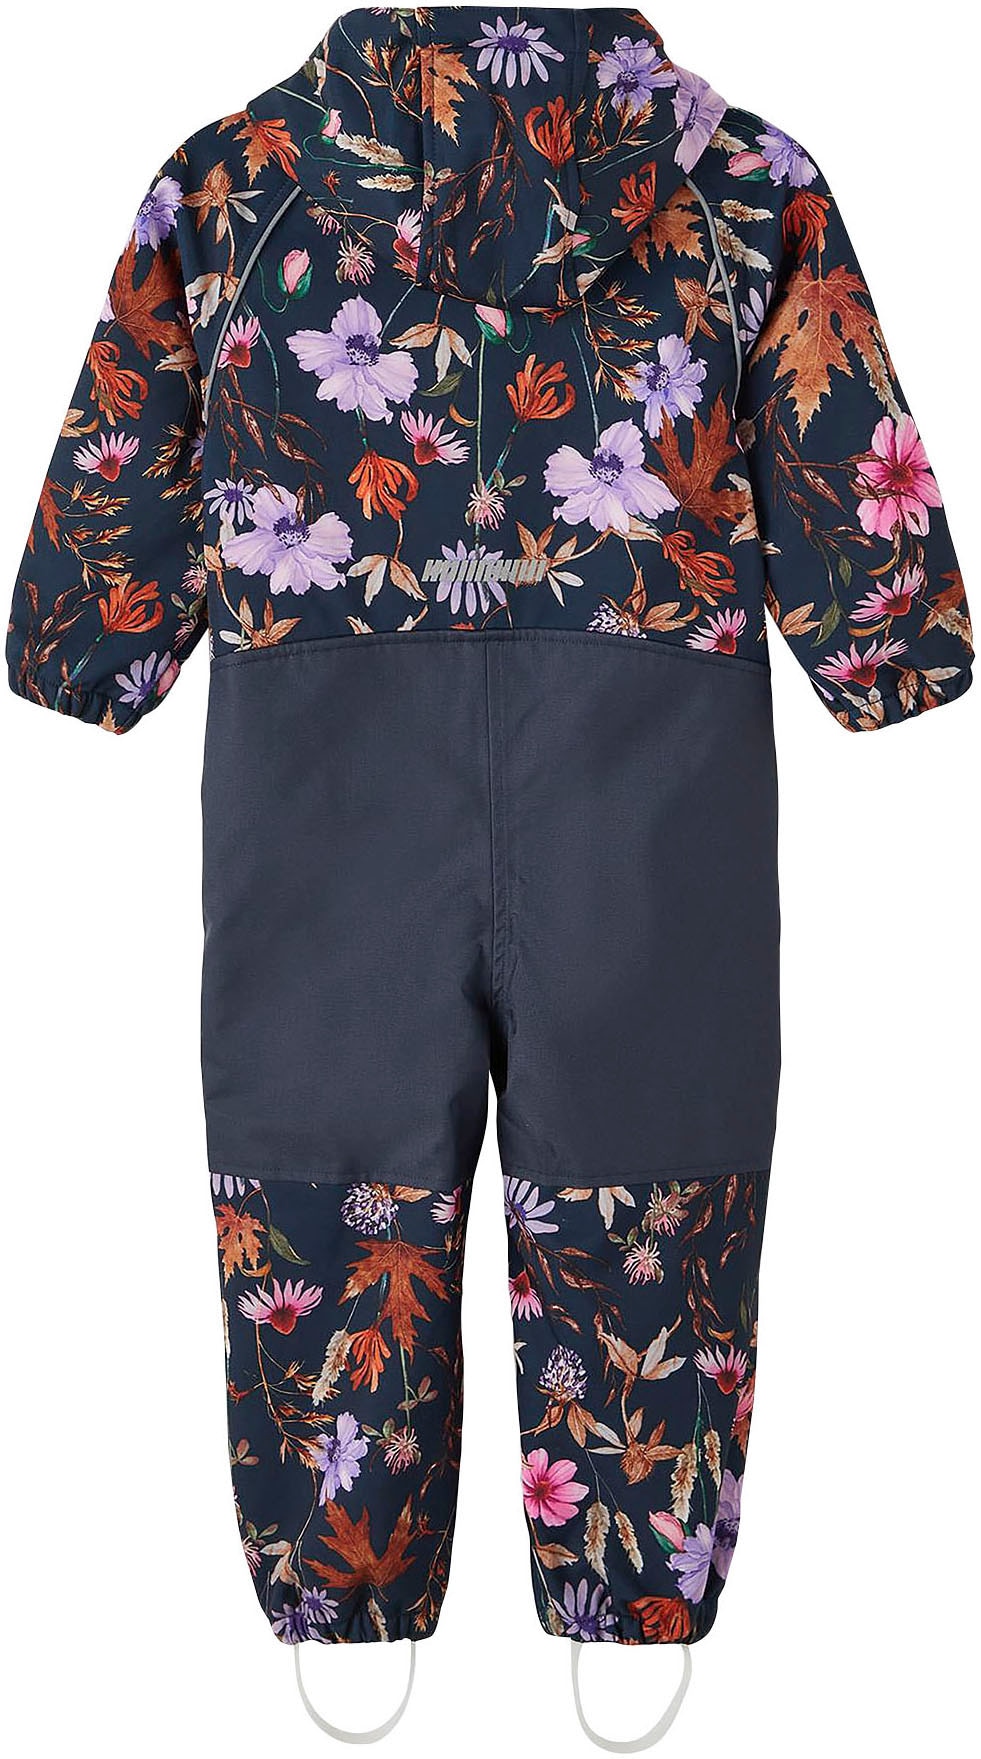 Overall It »NMFALFA08 AUTUMN online FLOWER kaufen FO NOOS« Name SUIT